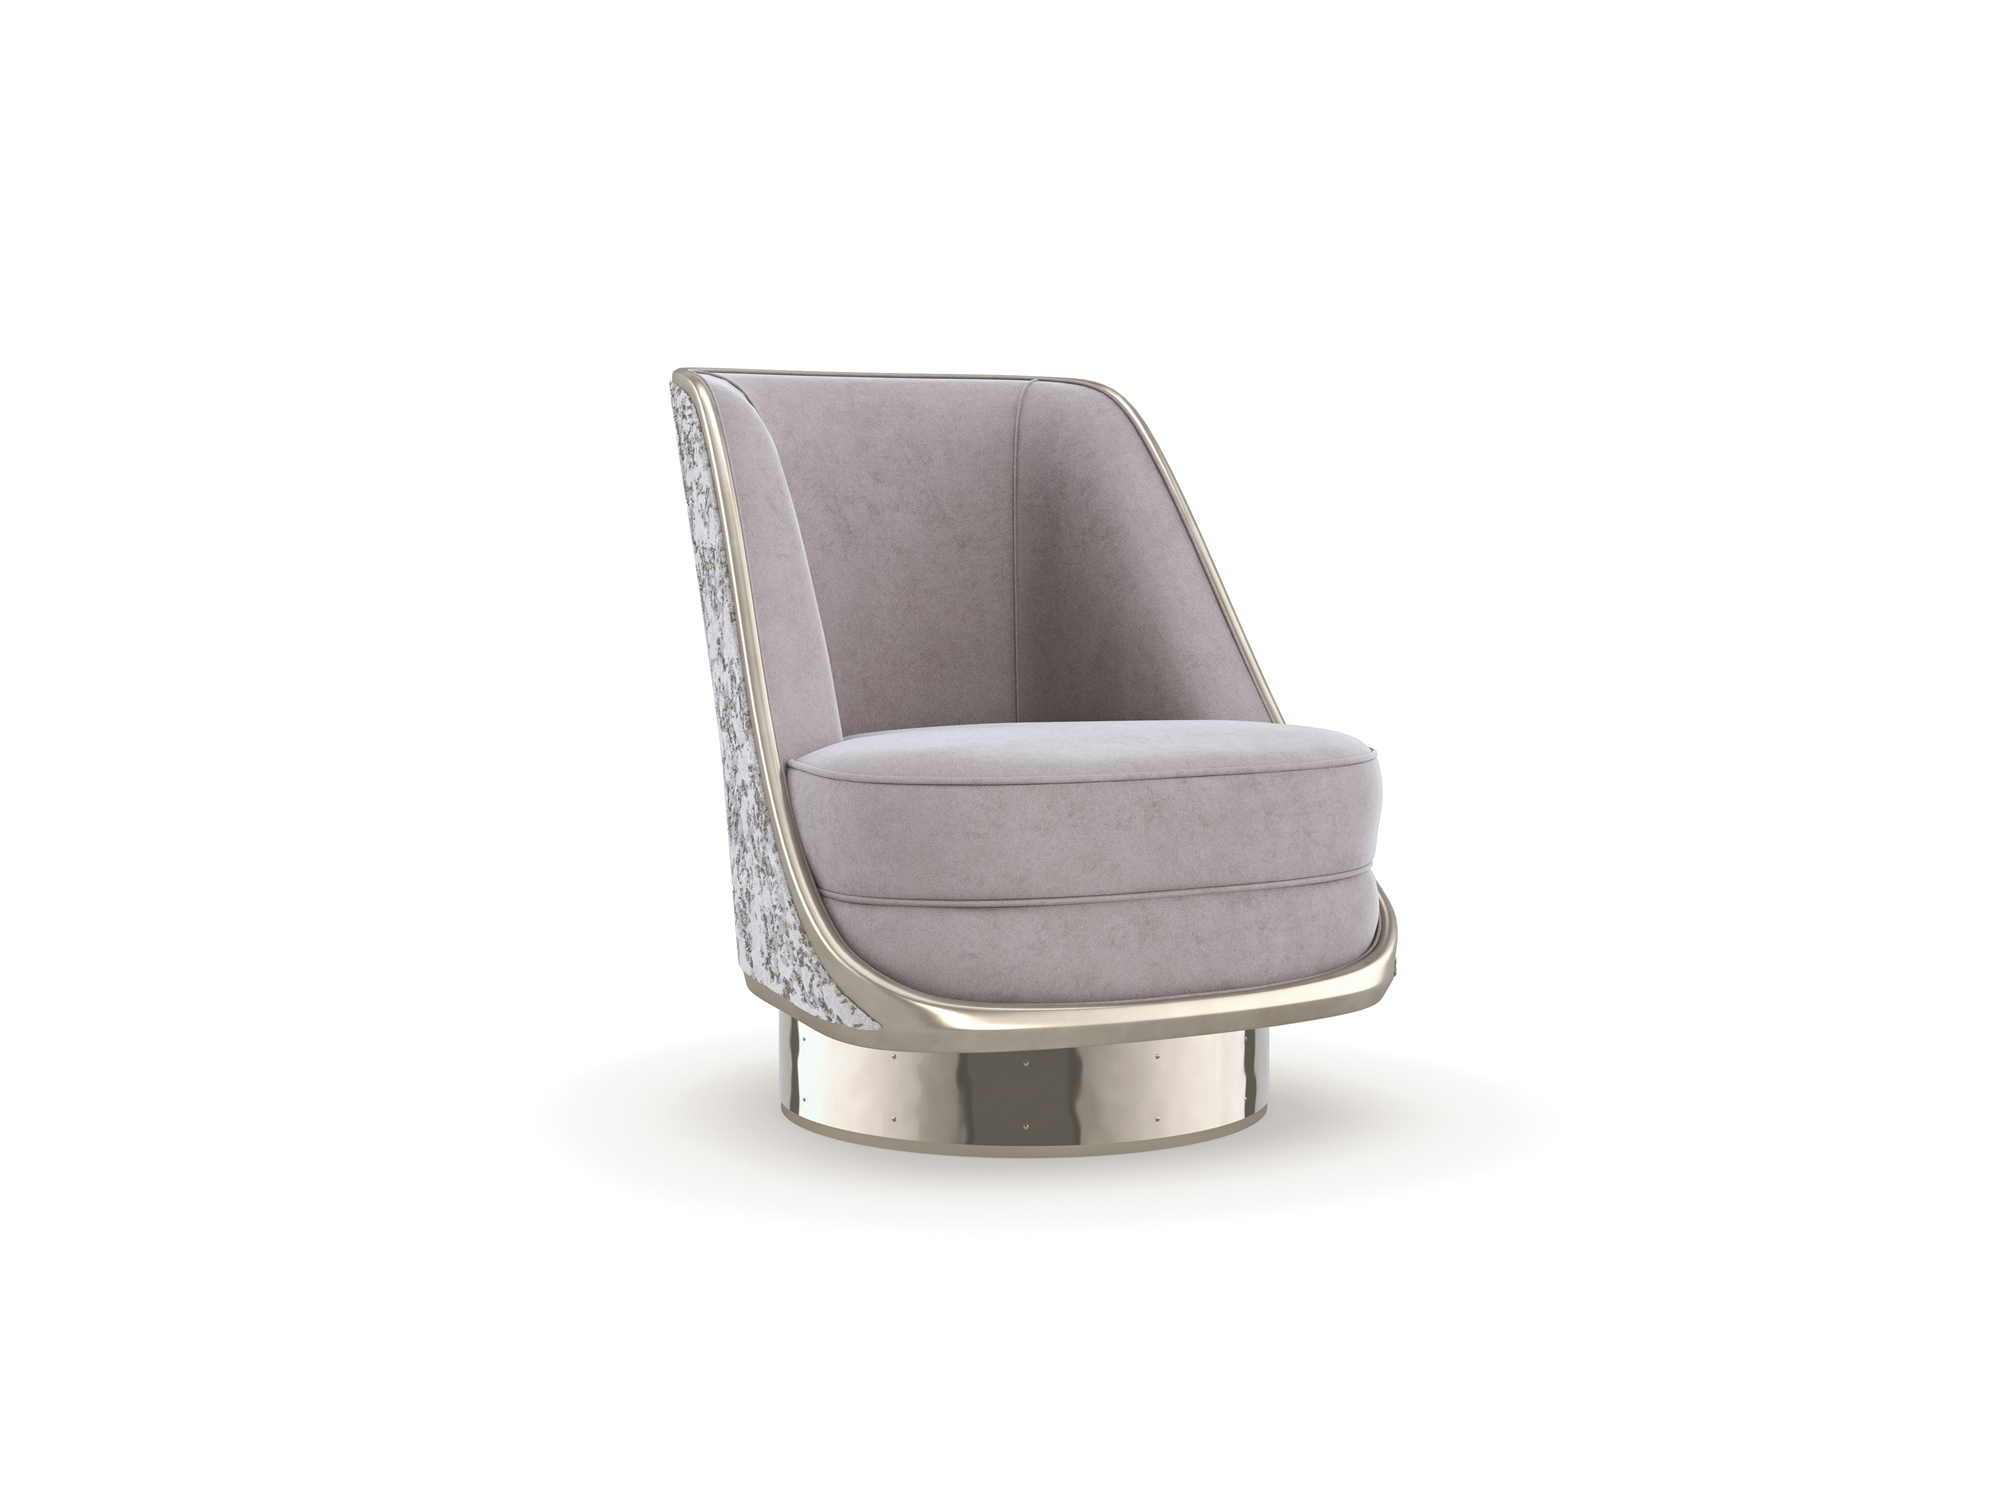 Desmond Go For a Spin Chair in Silver Shadow - Euro Living Furniture